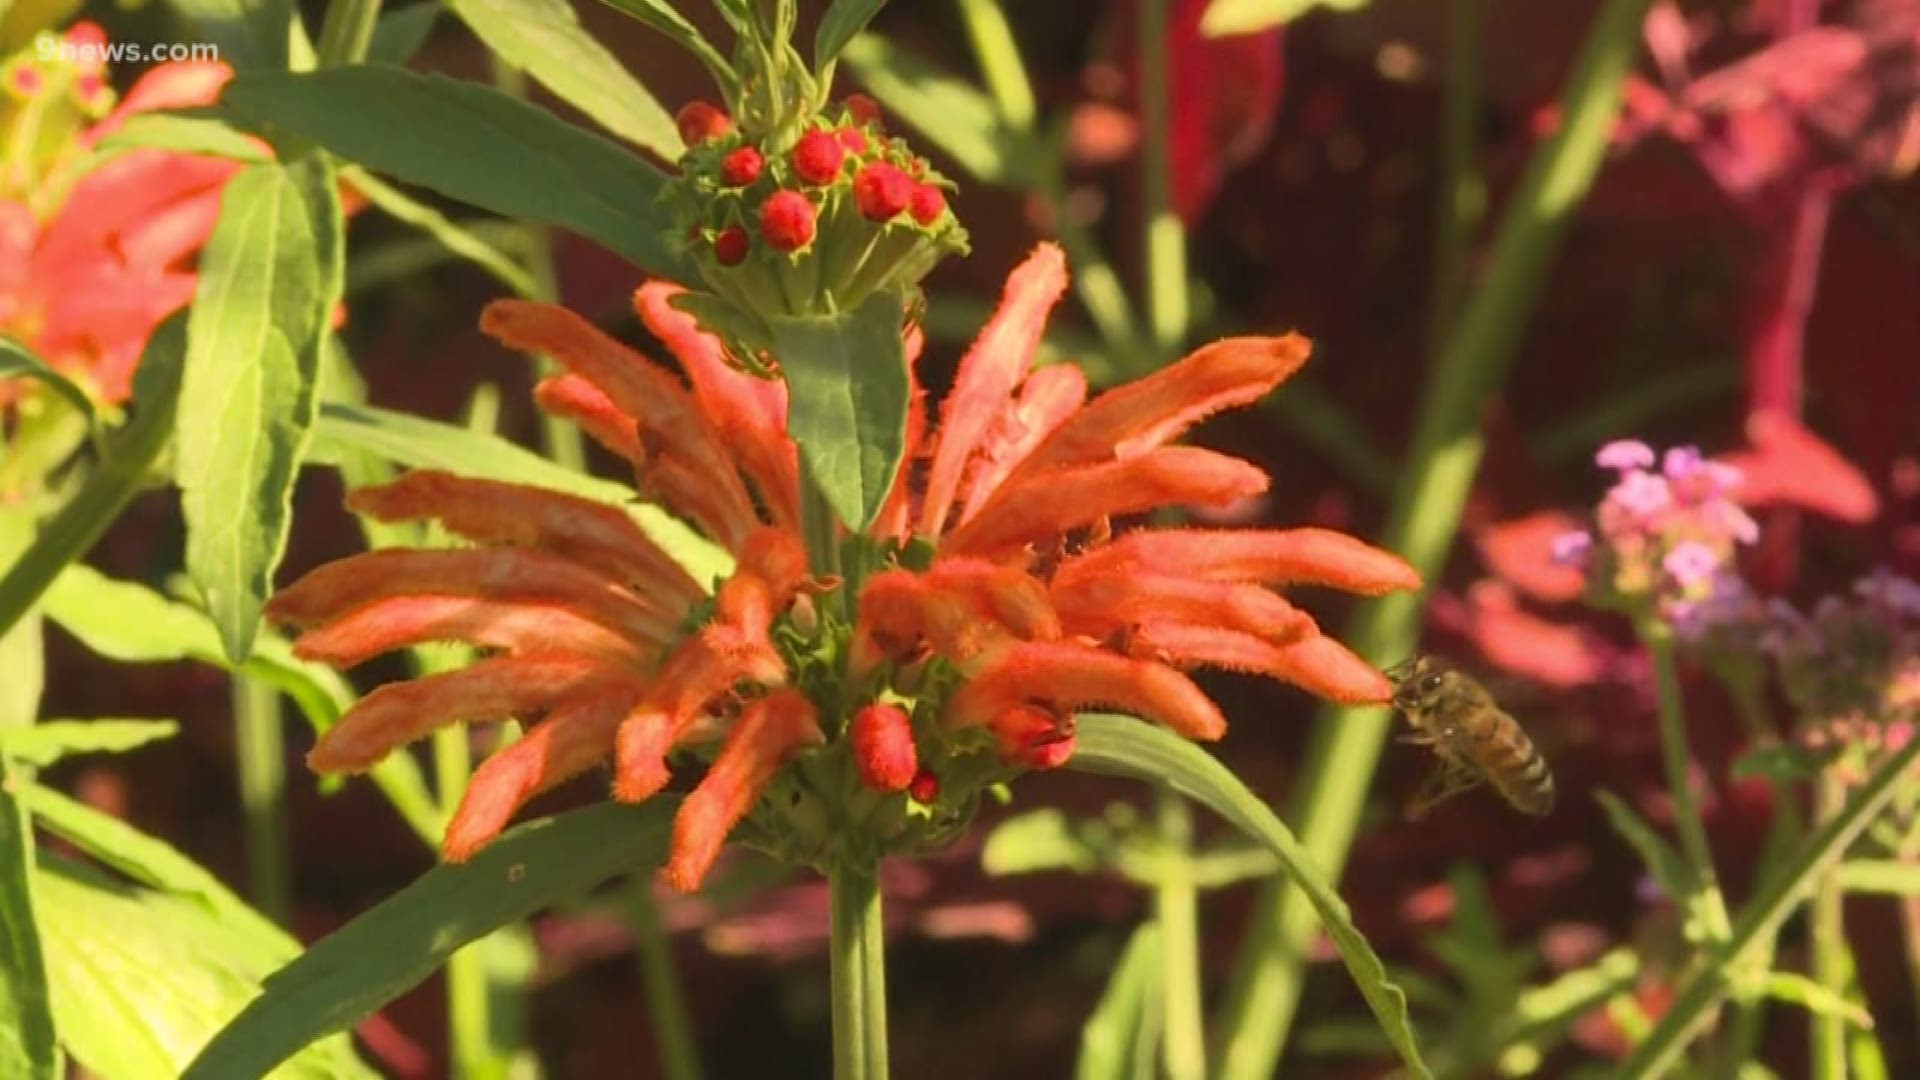 If your garden lacks the wow factor, branch out. Grow some unusual plants.